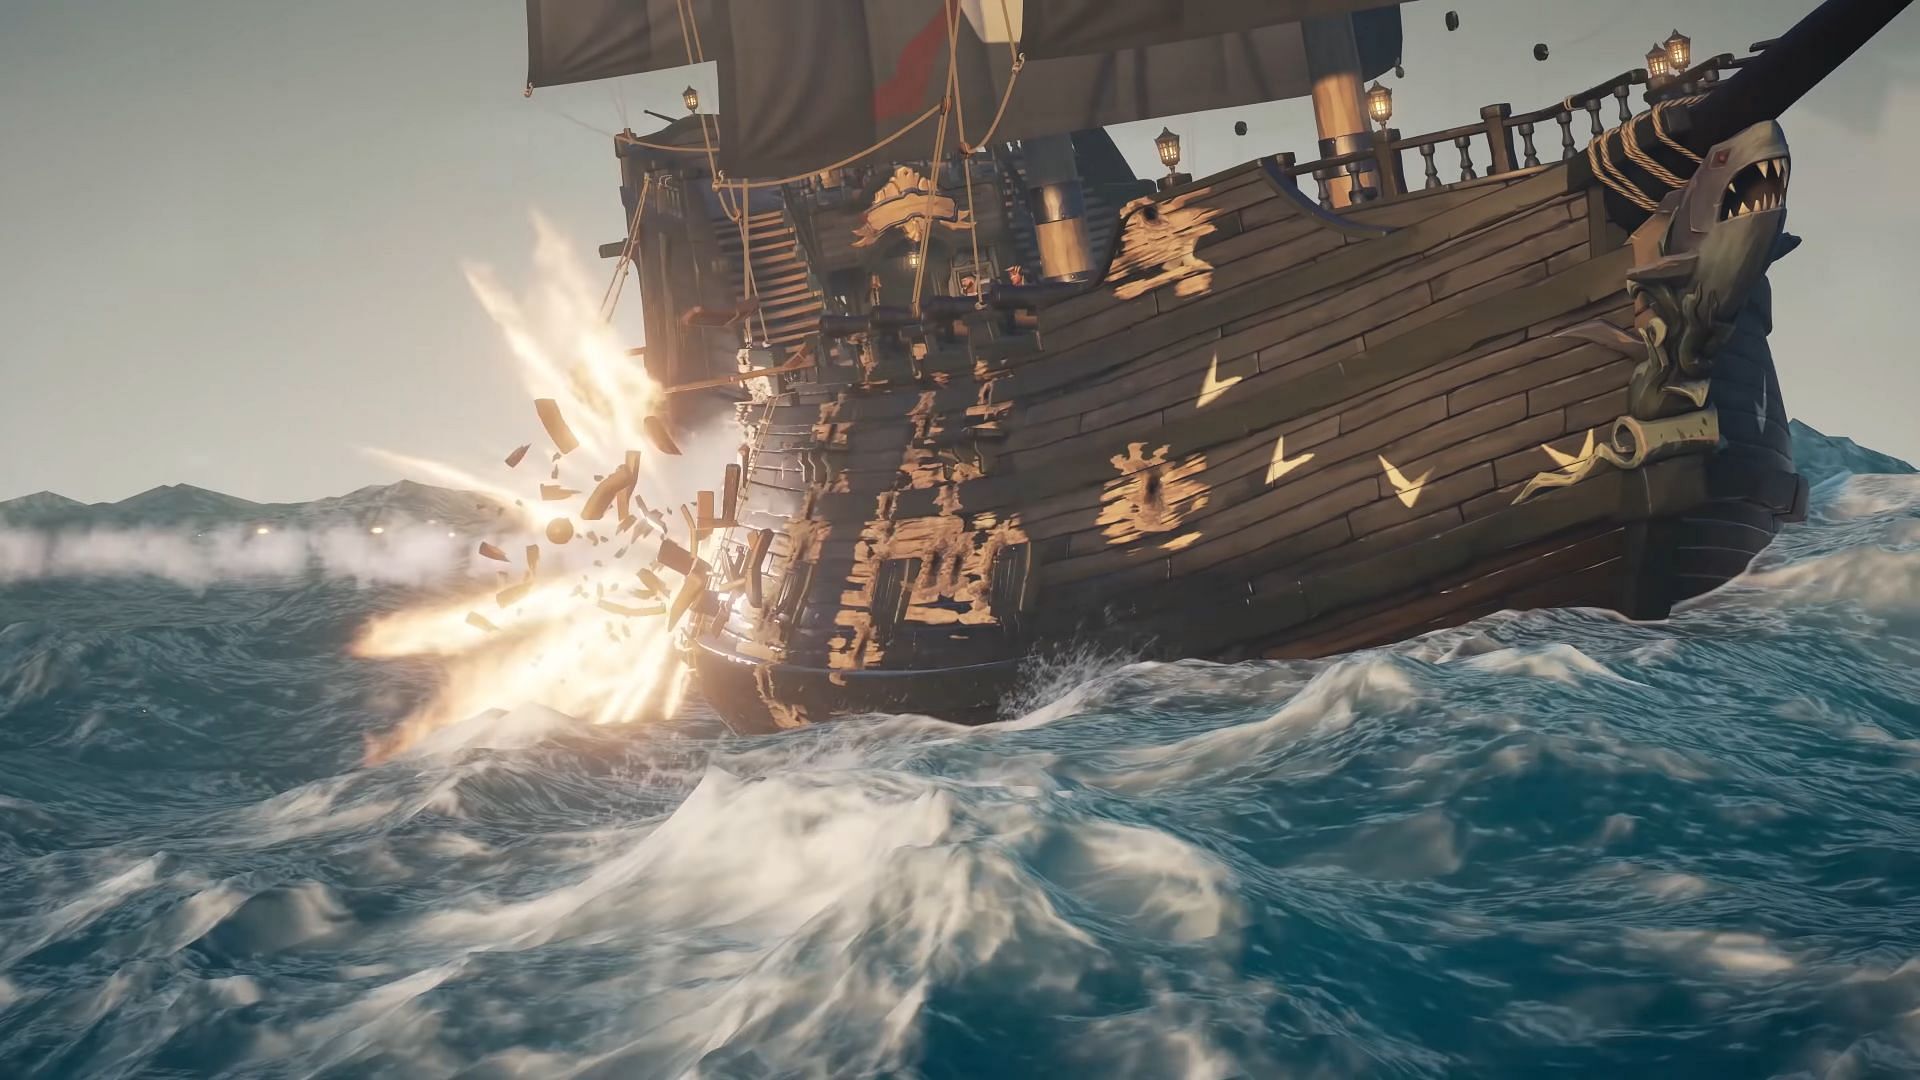 A ship damaged by a canon (Image via Sea of Thieves)